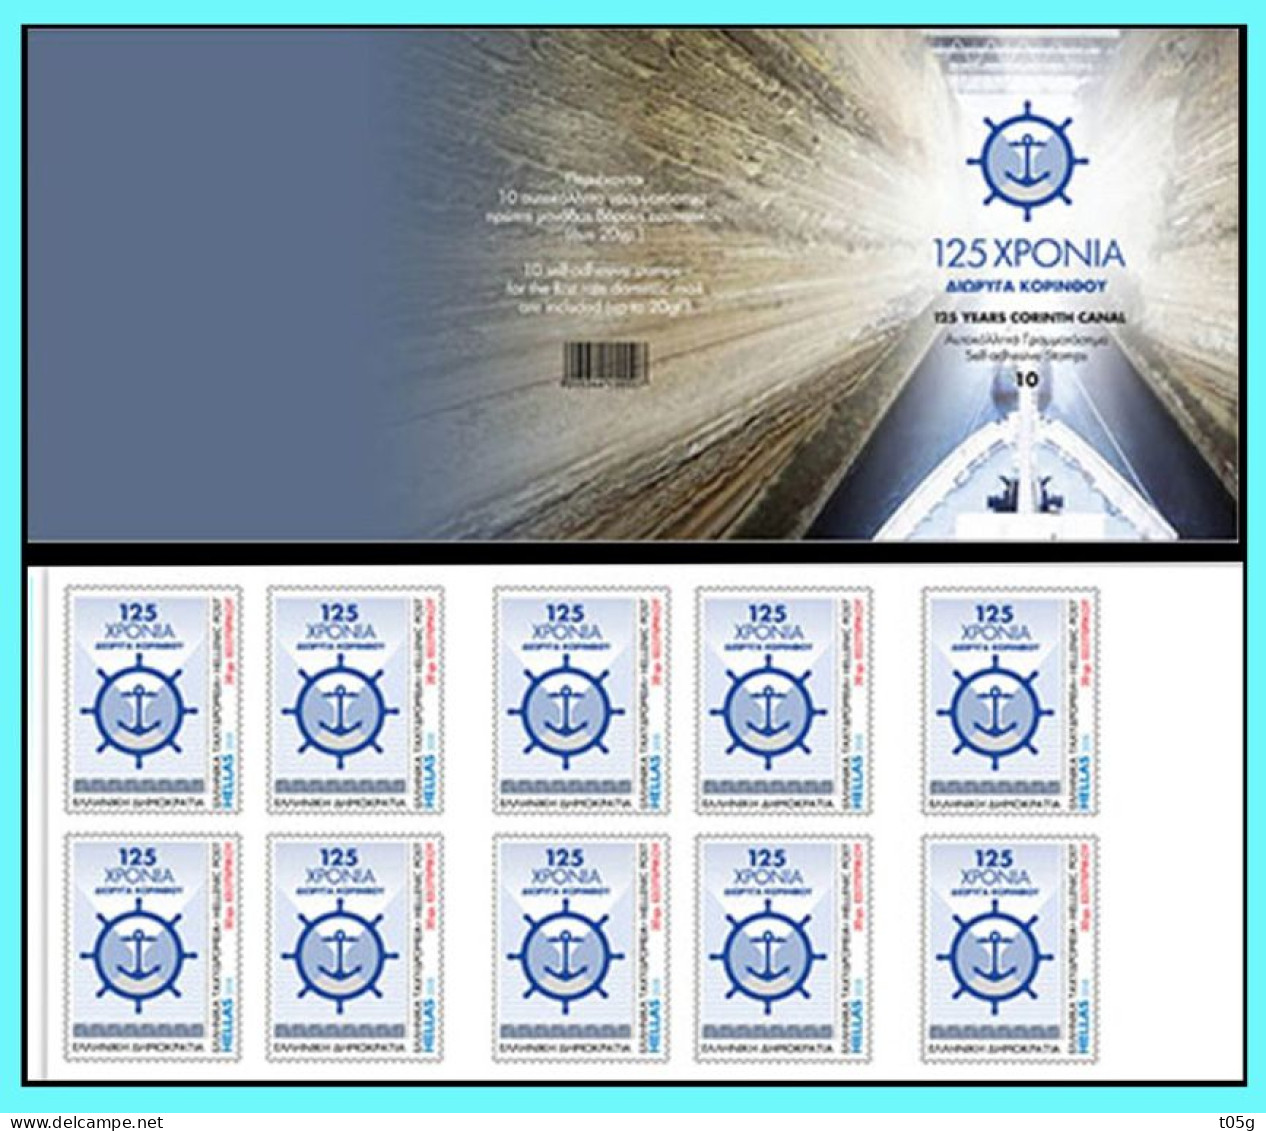 GREECE- GRECE  - HELLAS 2018: 125 YEARS OF THE KORINTH CANAL​ Self-athesive Stamp Compl. Booklet  MNH** - Neufs